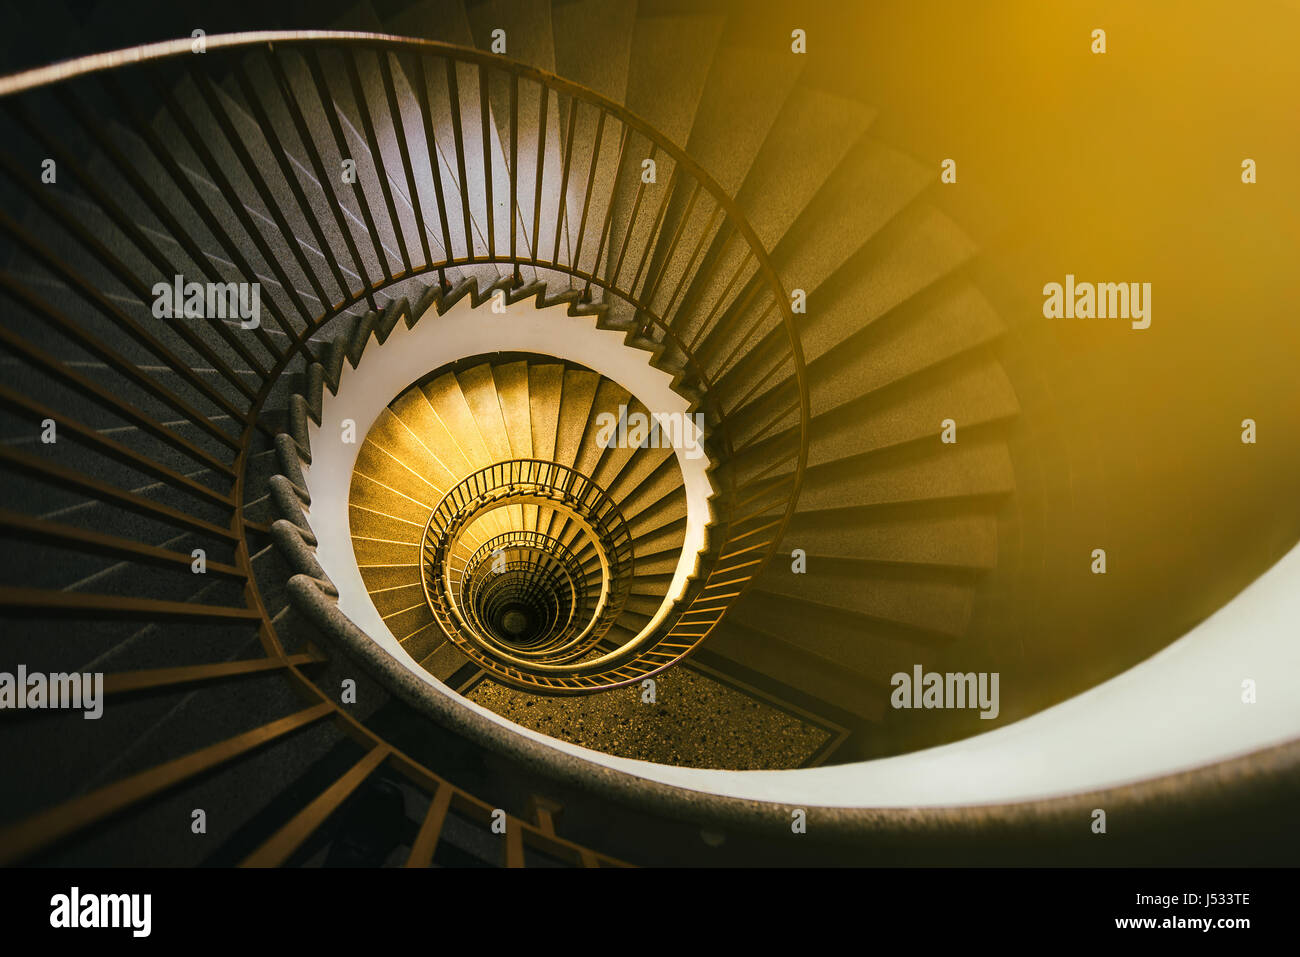 Golden spiral staircase in an old building Stock Photo